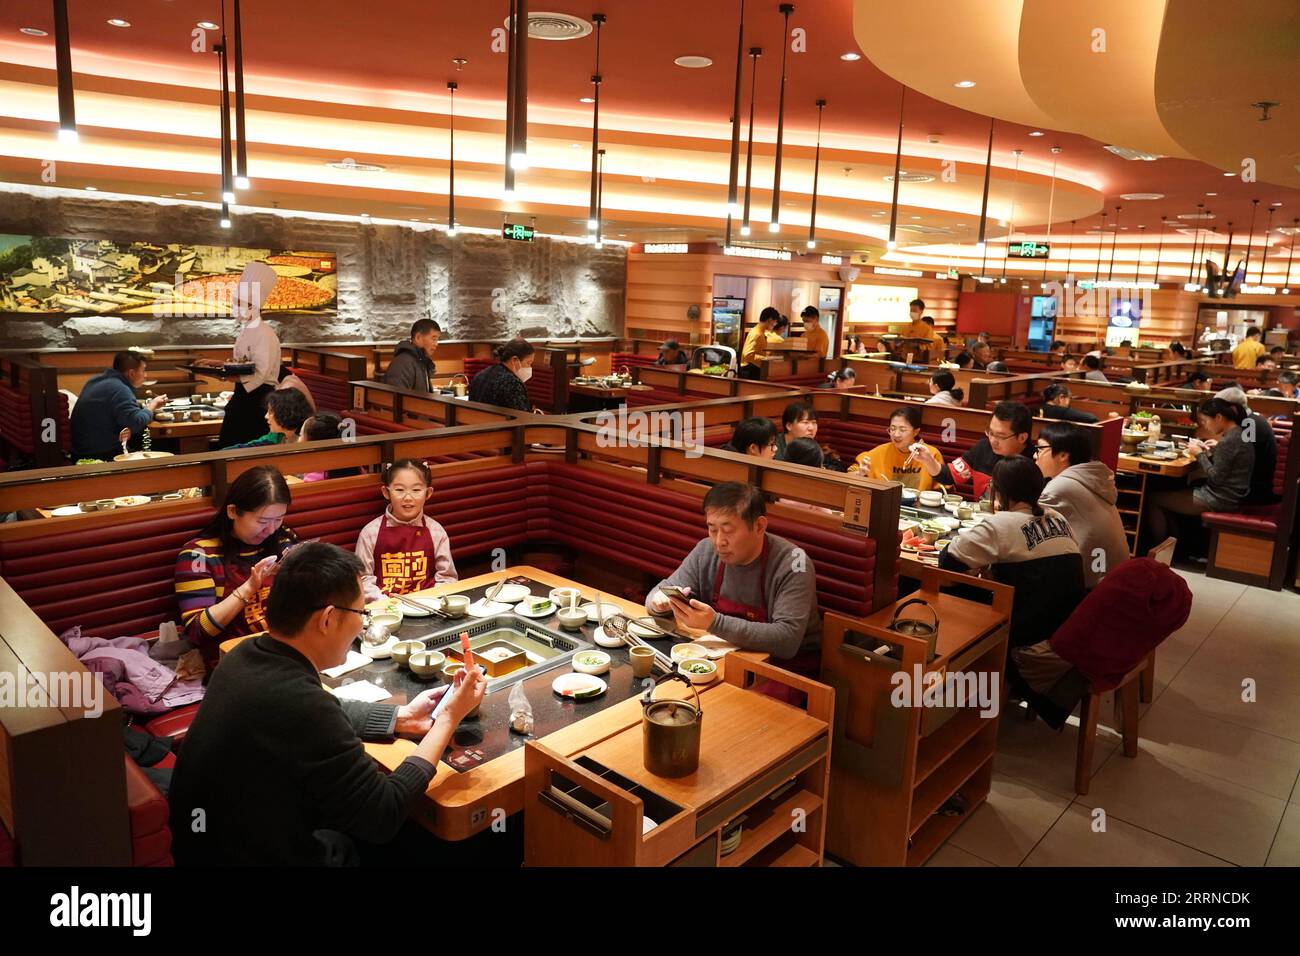 230103 -- BEIJING, Jan. 3, 2023 -- People dine at a restaurant in Beijing, capital of China, Jan. 1, 2023.  Xinhua Headlines: China sees New Year consumption recovery, eyes 2023 growth RenxChao PUBLICATIONxNOTxINxCHN Stock Photo